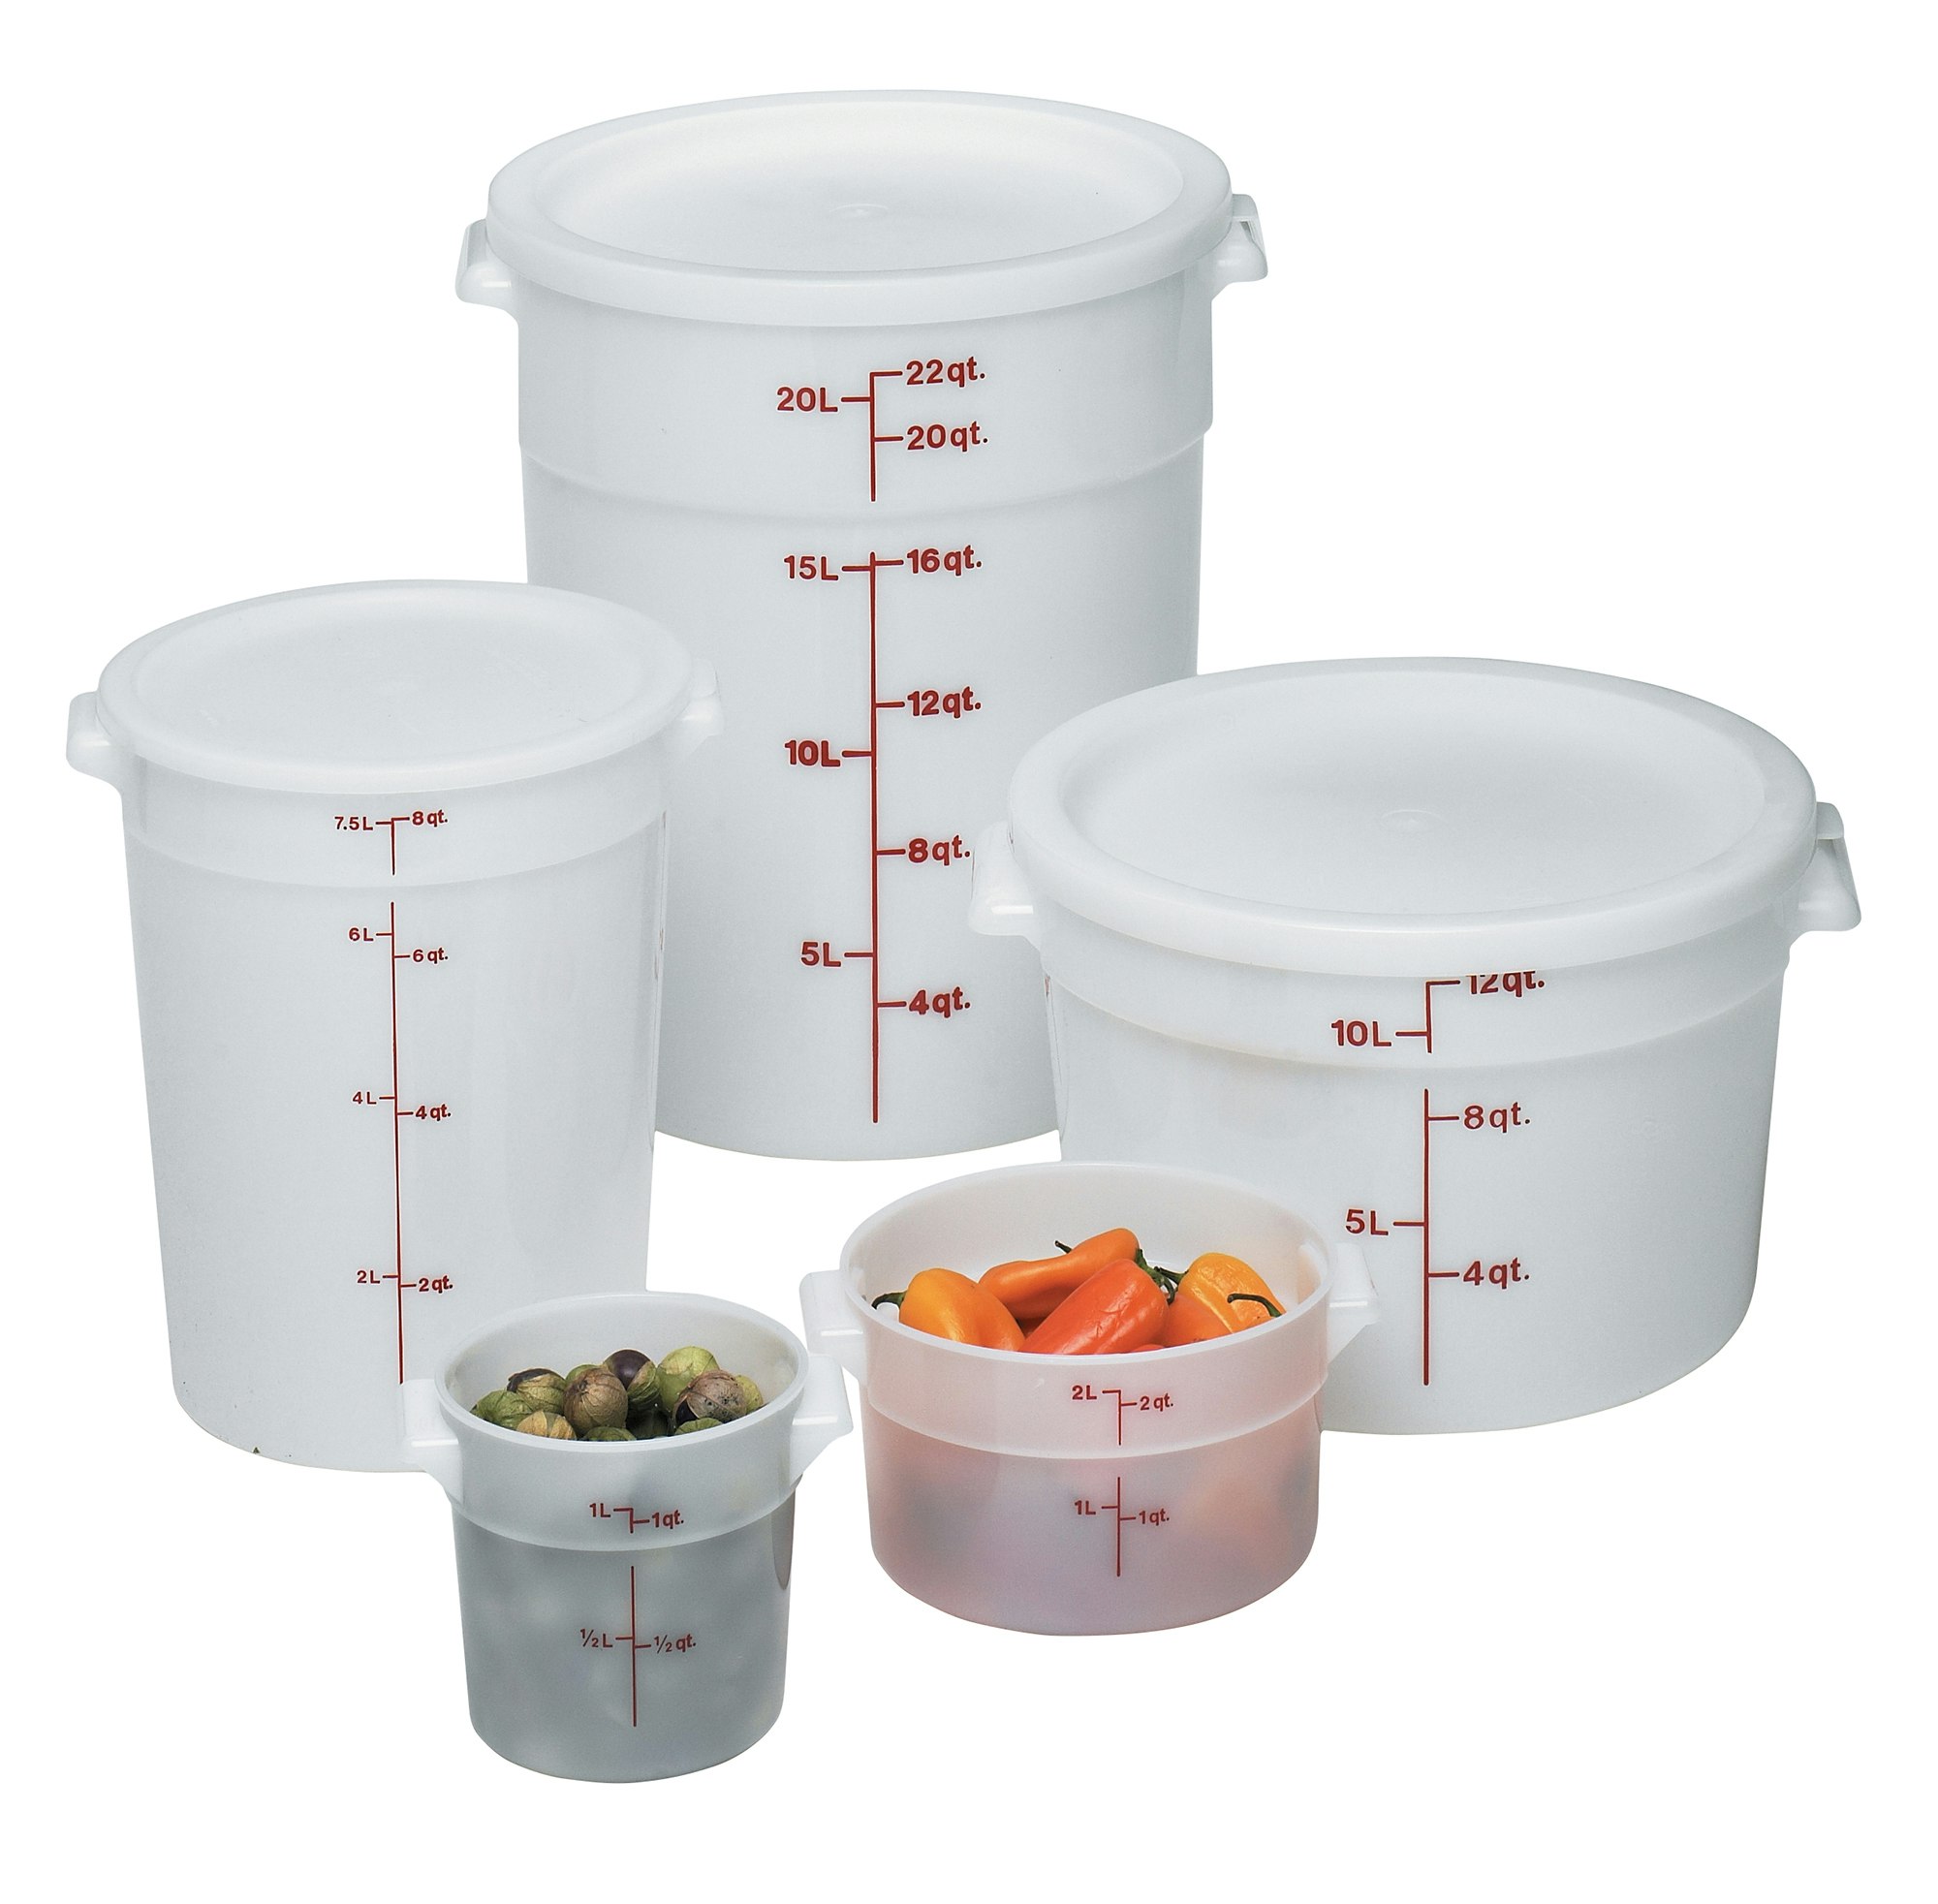 https://cambro-dam.imgix.net/PU0DO3EZ/at/plg746-7m4188-ed262b/Poly_White_Round_Containers_Group_Shot.jpg?dl